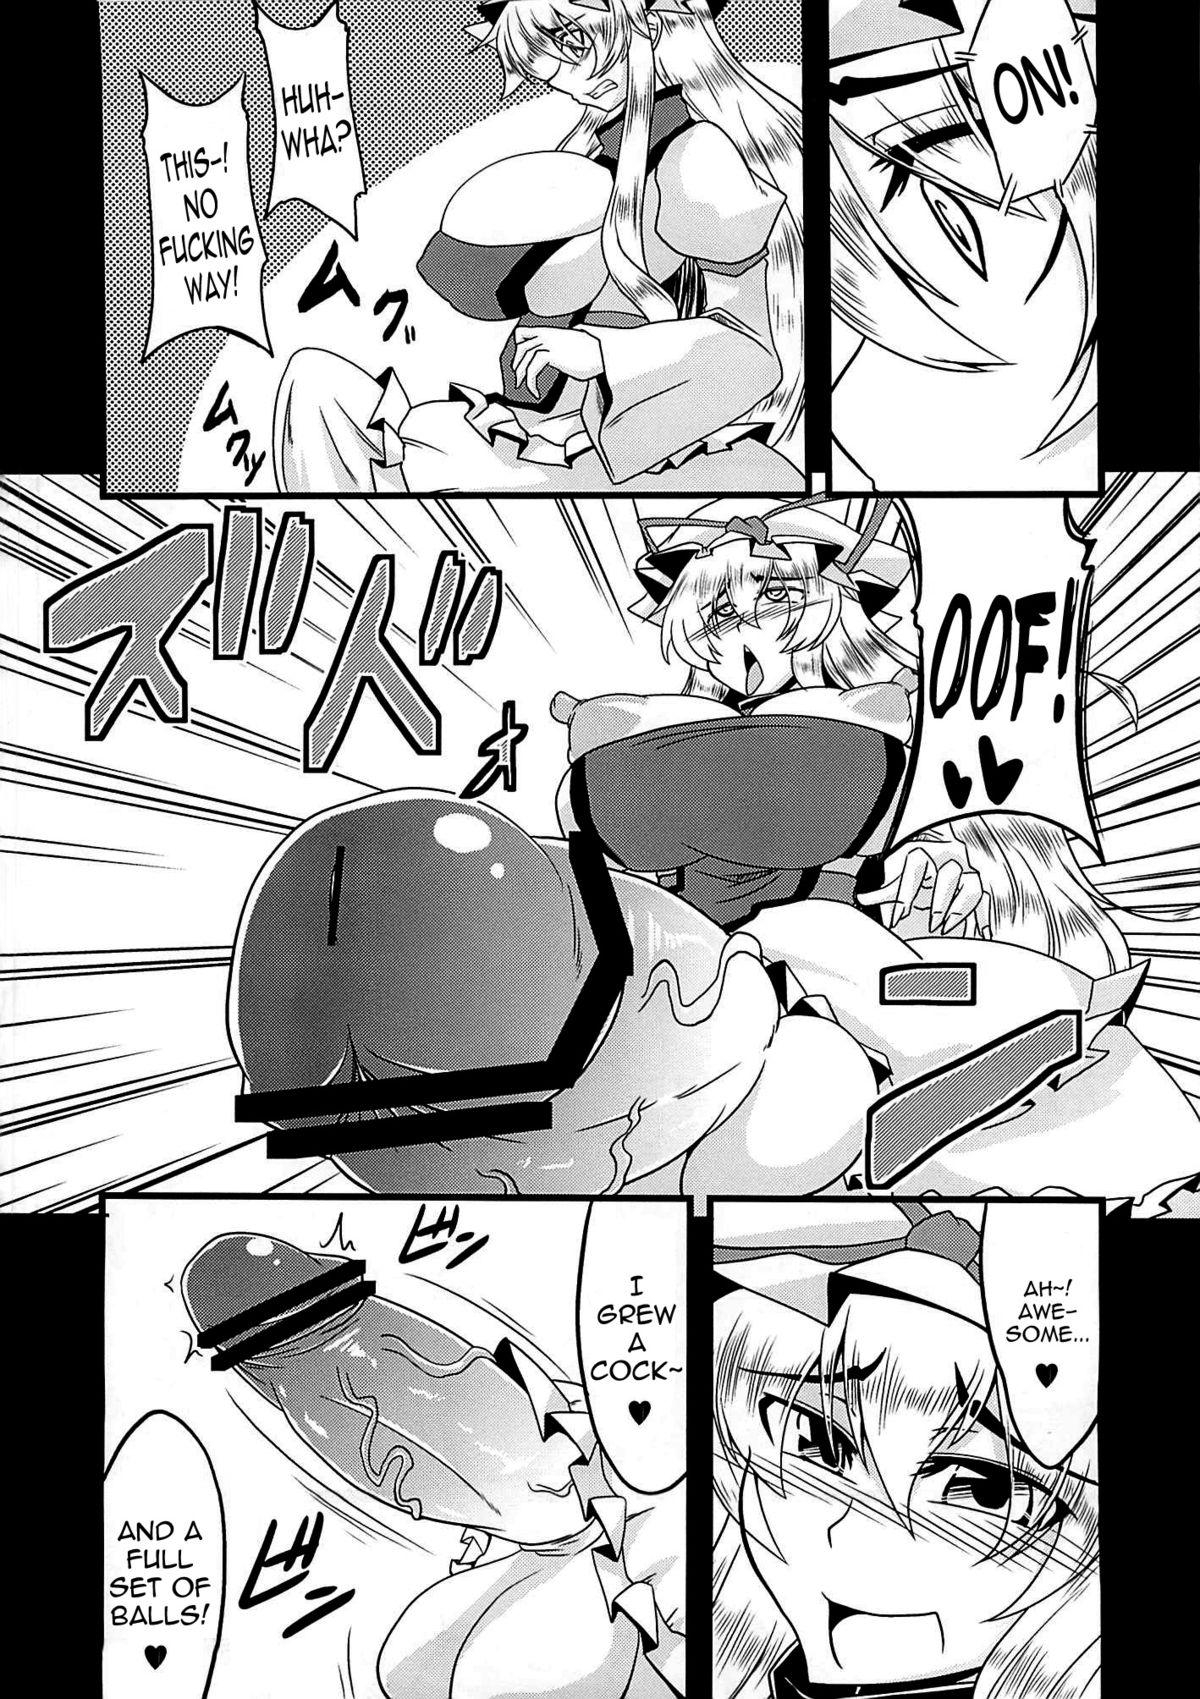 Female Illusionary Cock Story - Touhou project Couple Sex - Page 5